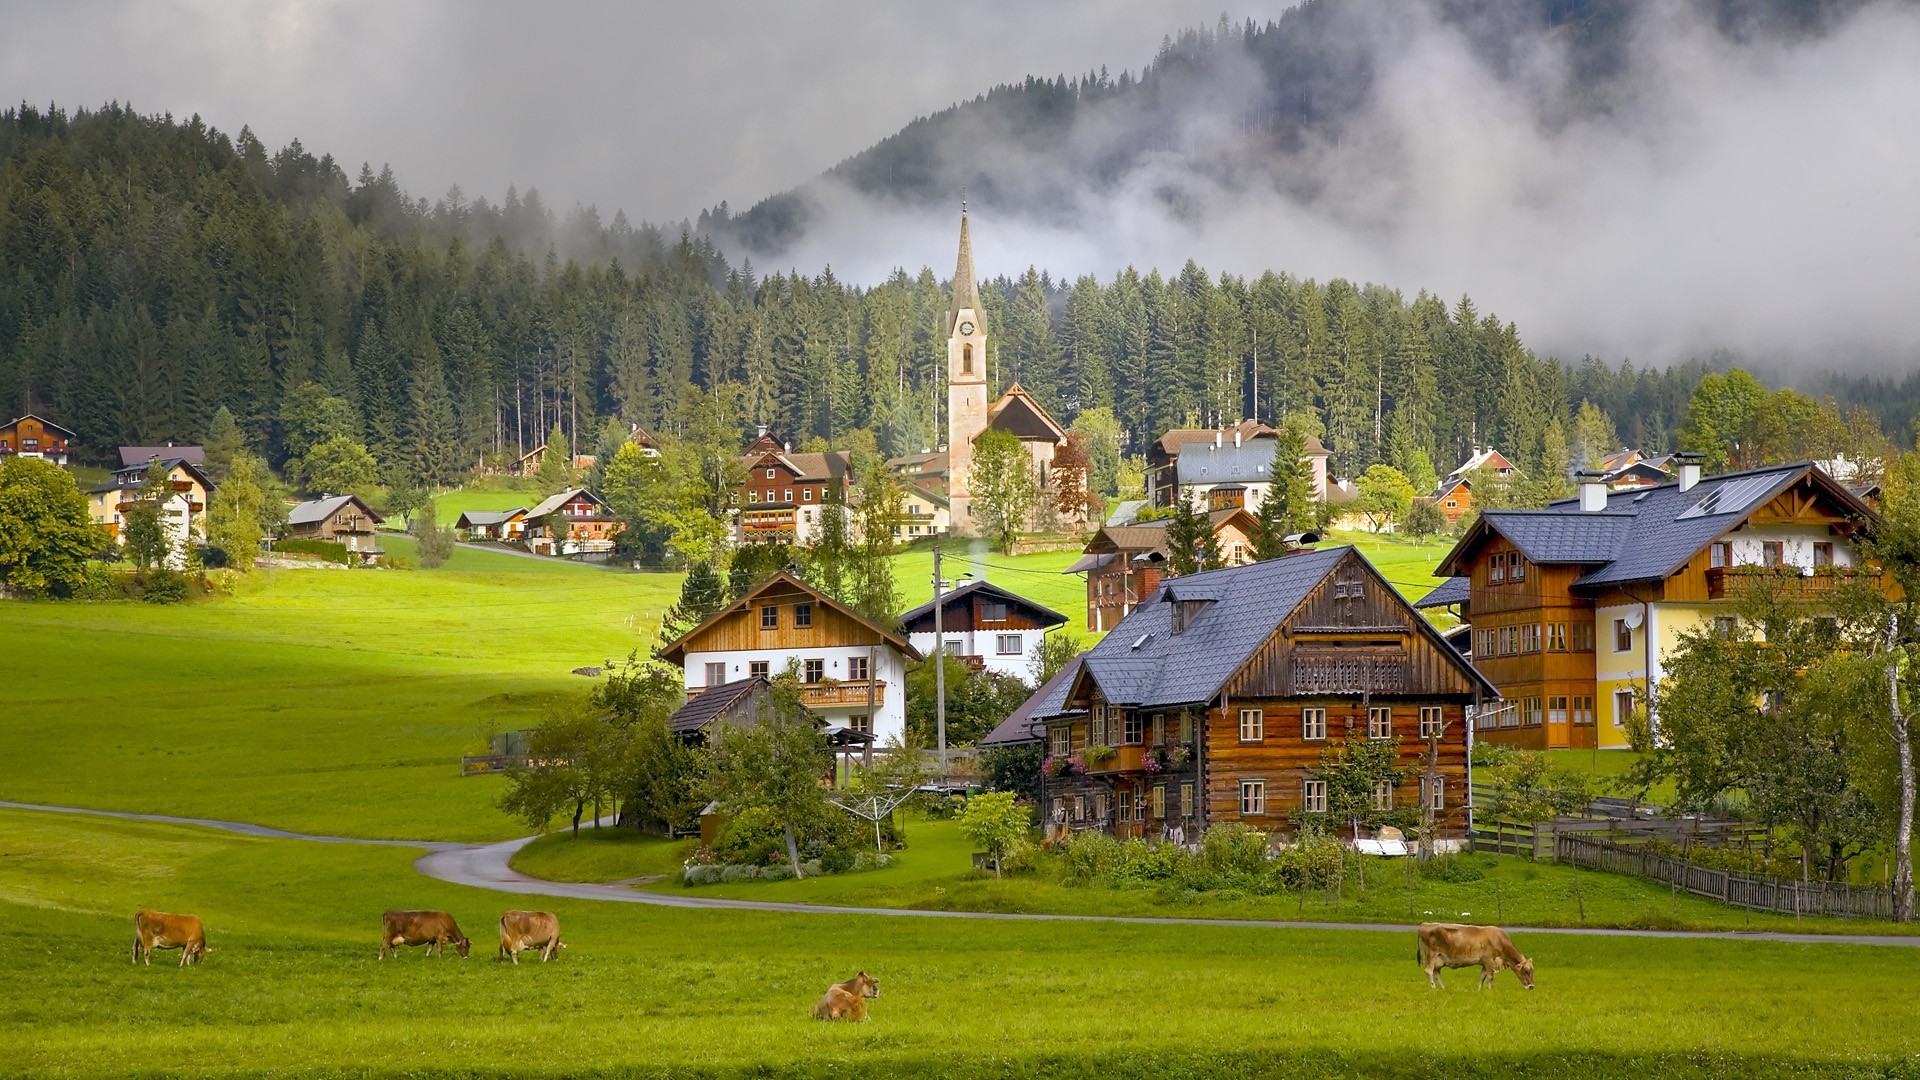 General 1920x1080 village architecture building Austria wood house church nature trees forest mist road animals cow grass idyllic